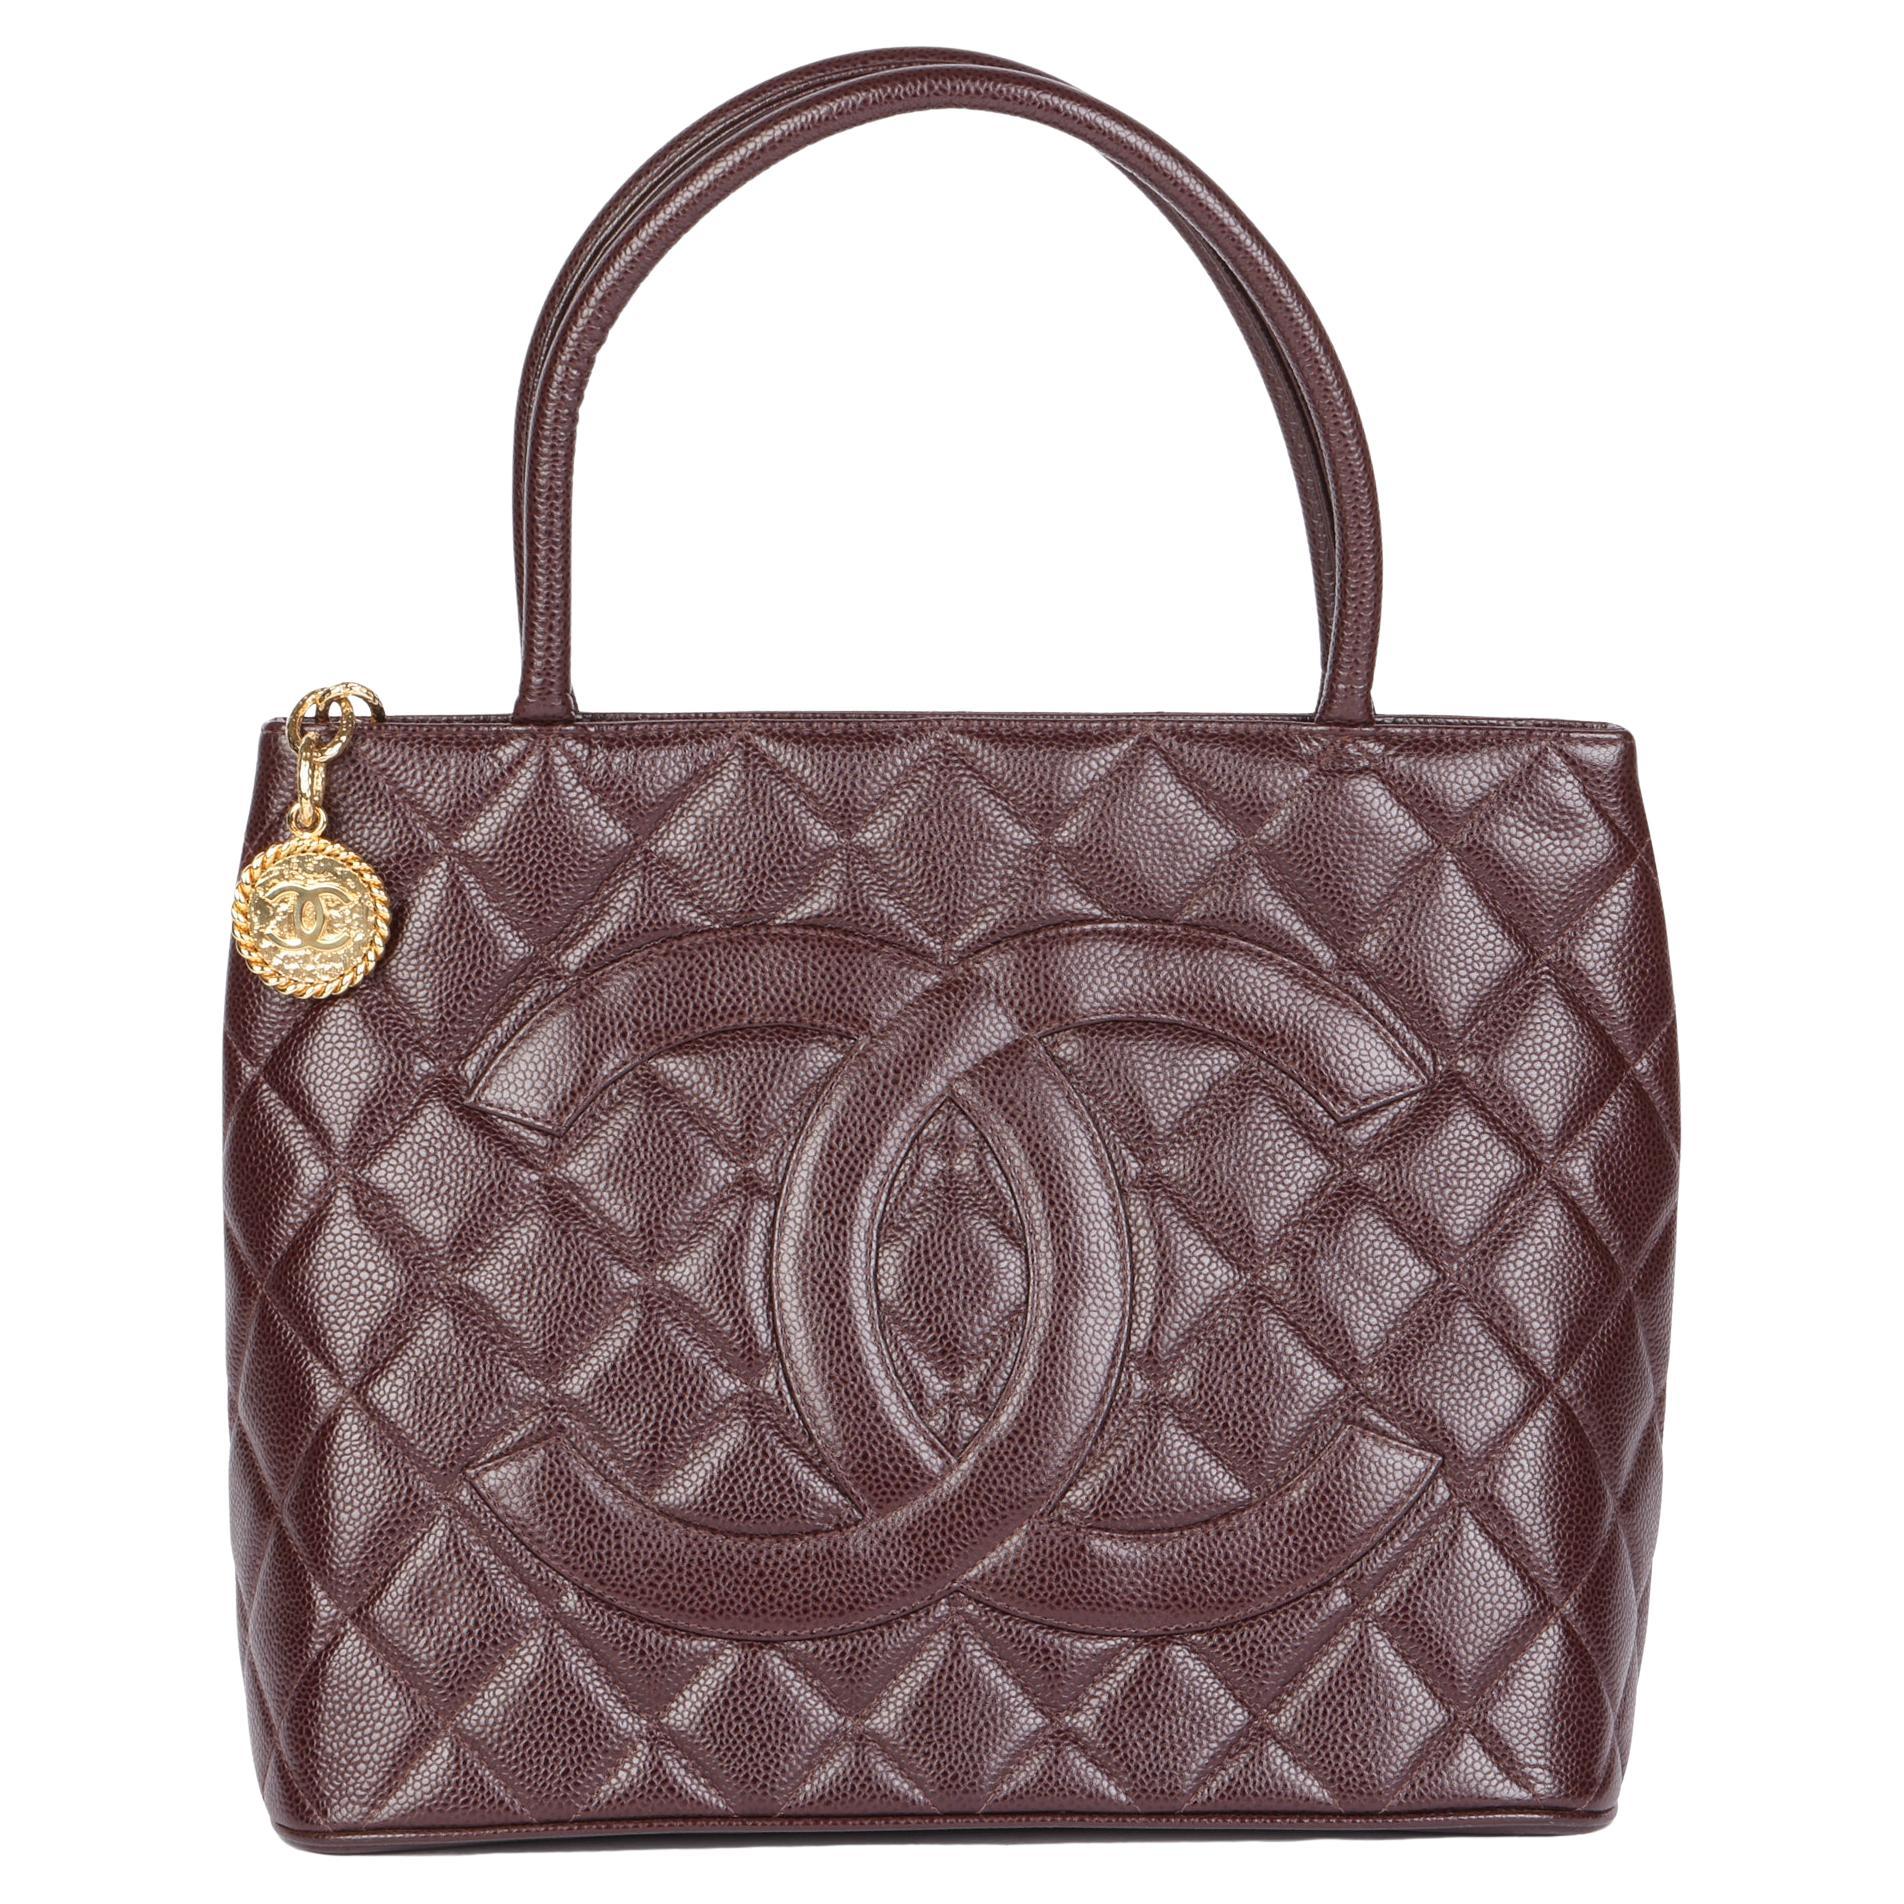 CHANEL Chocolate Brown Quilted Caviar Leather Vintage Medallion Tote